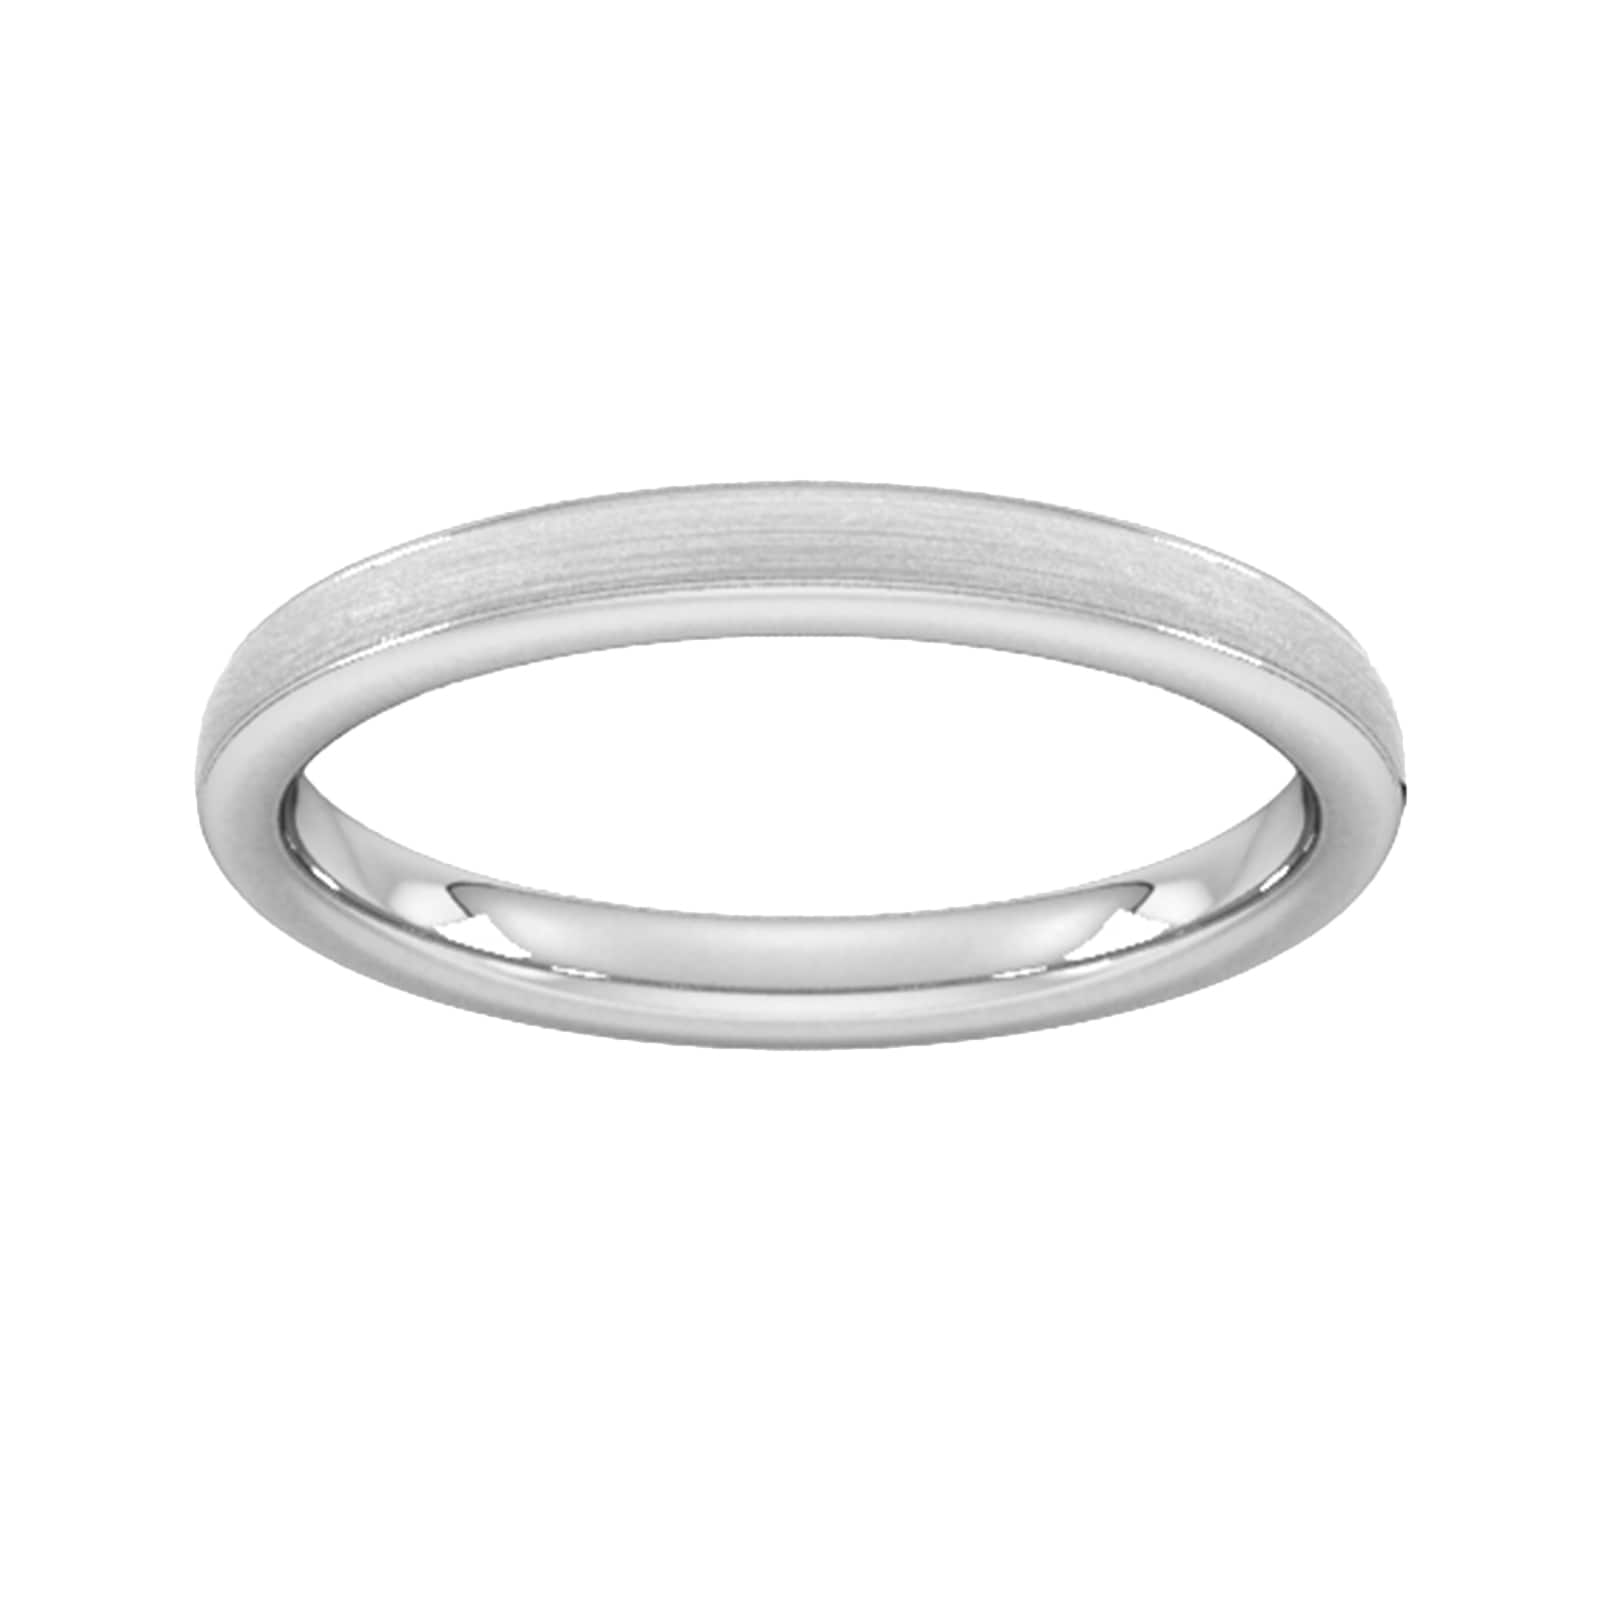 2.5mm D Shape Heavy Matt Centre With Grooves Wedding Ring In 9 Carat White Gold - Ring Size Z